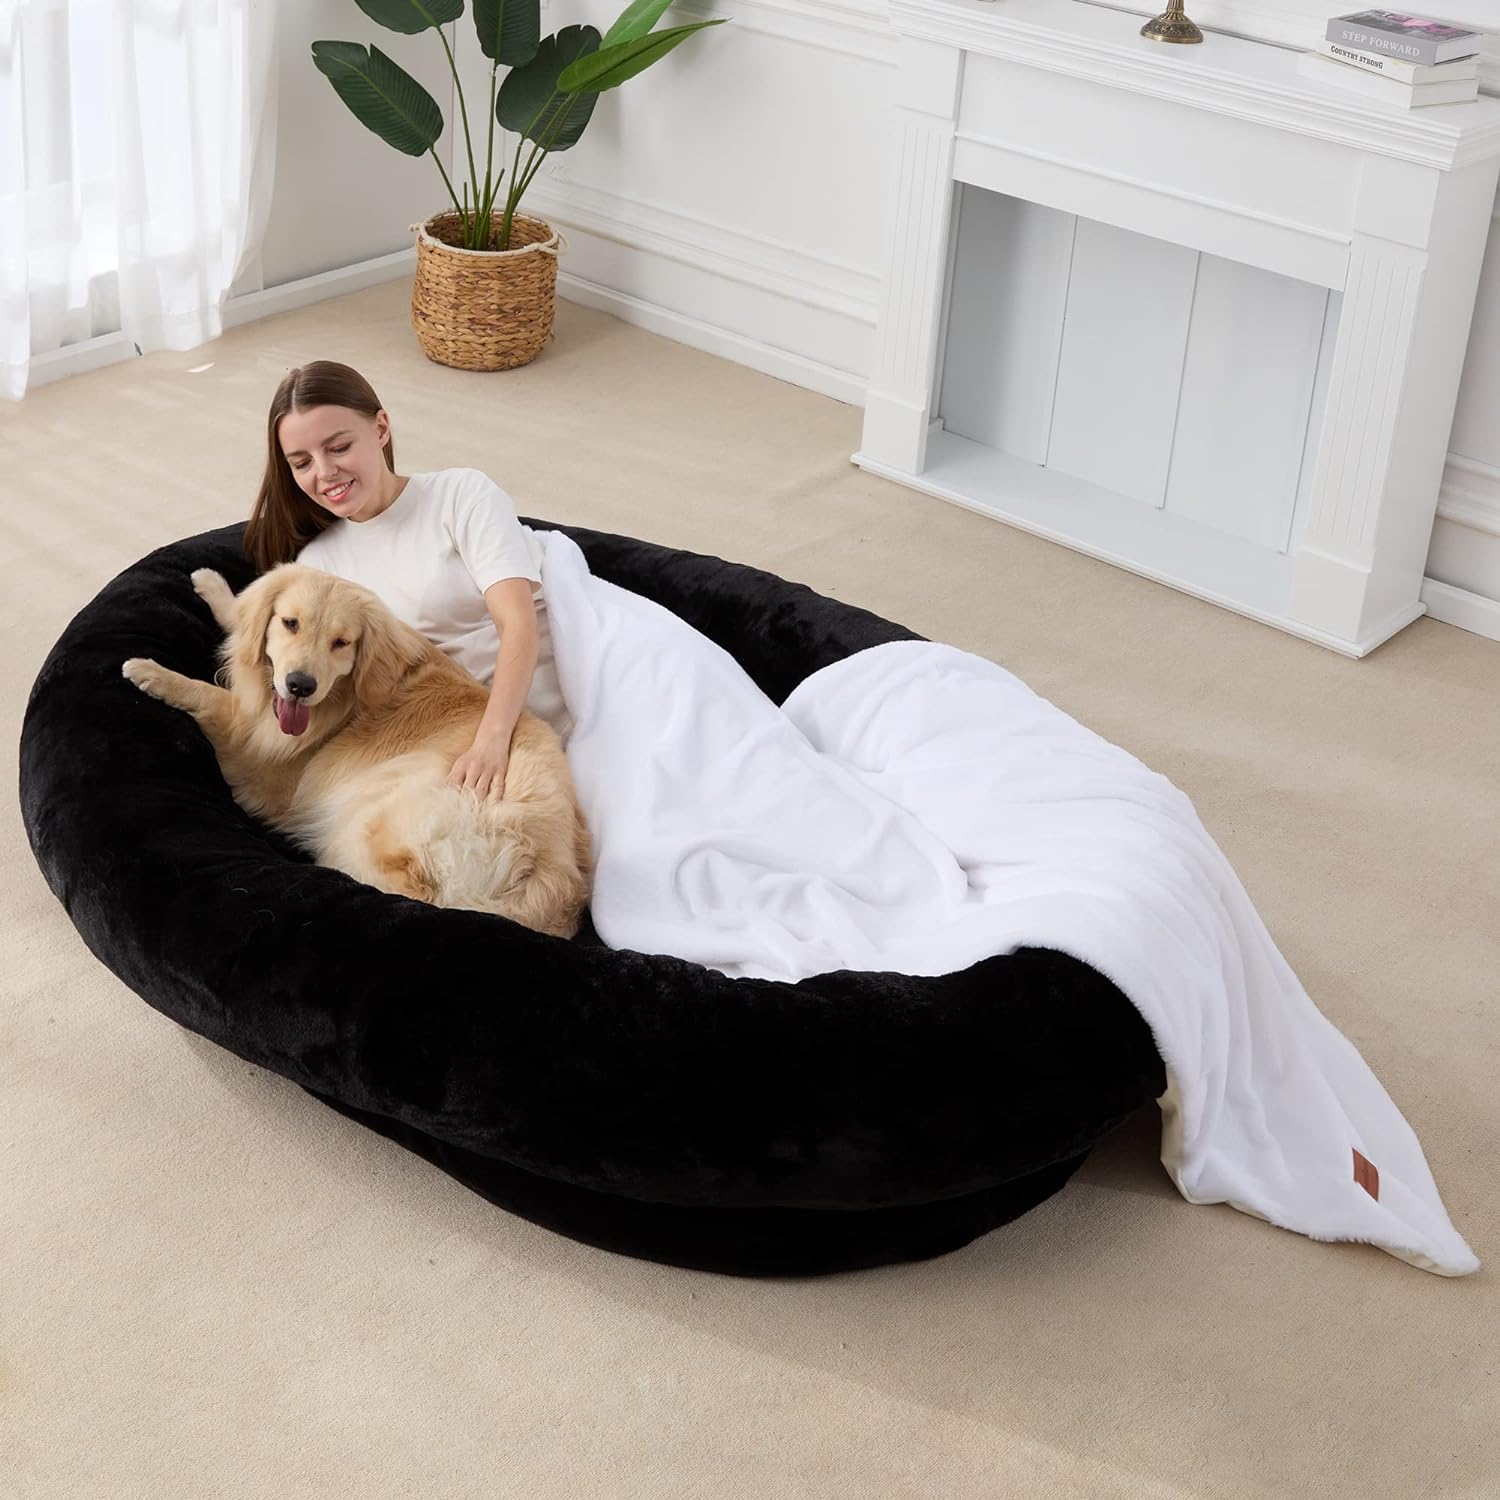 Homguava Large Human Dog Bed 72"x48"x10" Human-Sized Big Dog Bed for Adults&Pets Giant Beanbag Bed with Washable Fur Cover,Blanket and Strap (Large, Black)